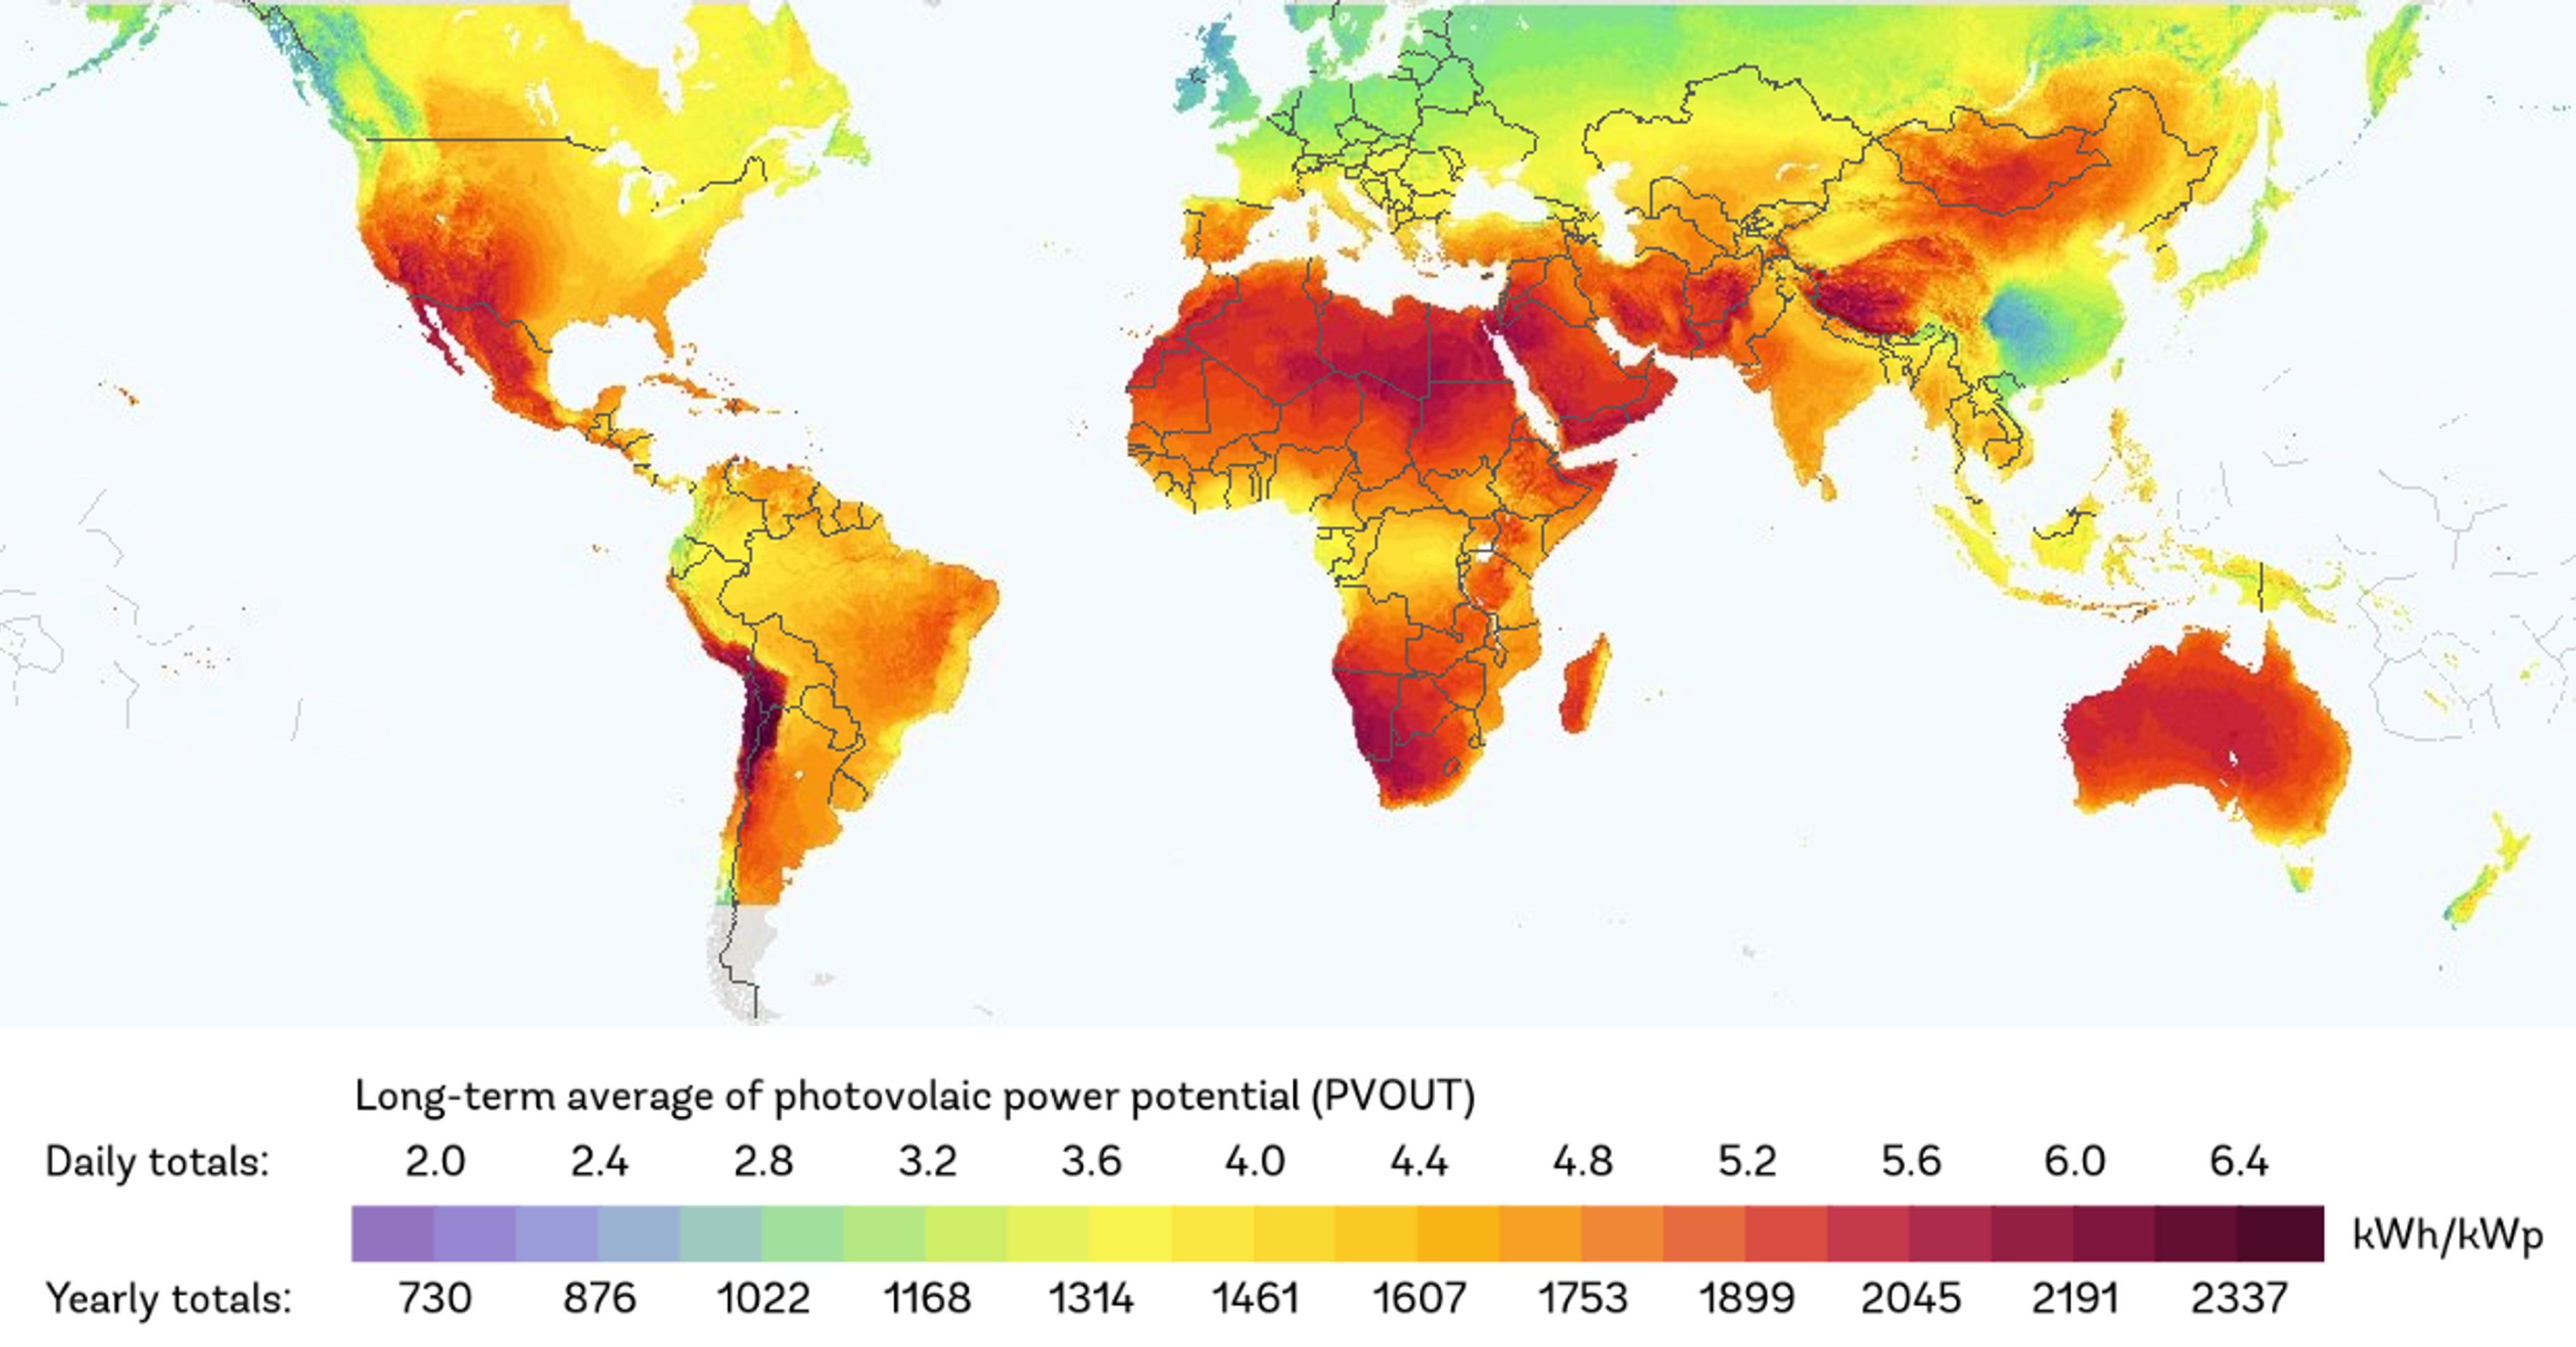 Photovoltaic power potential